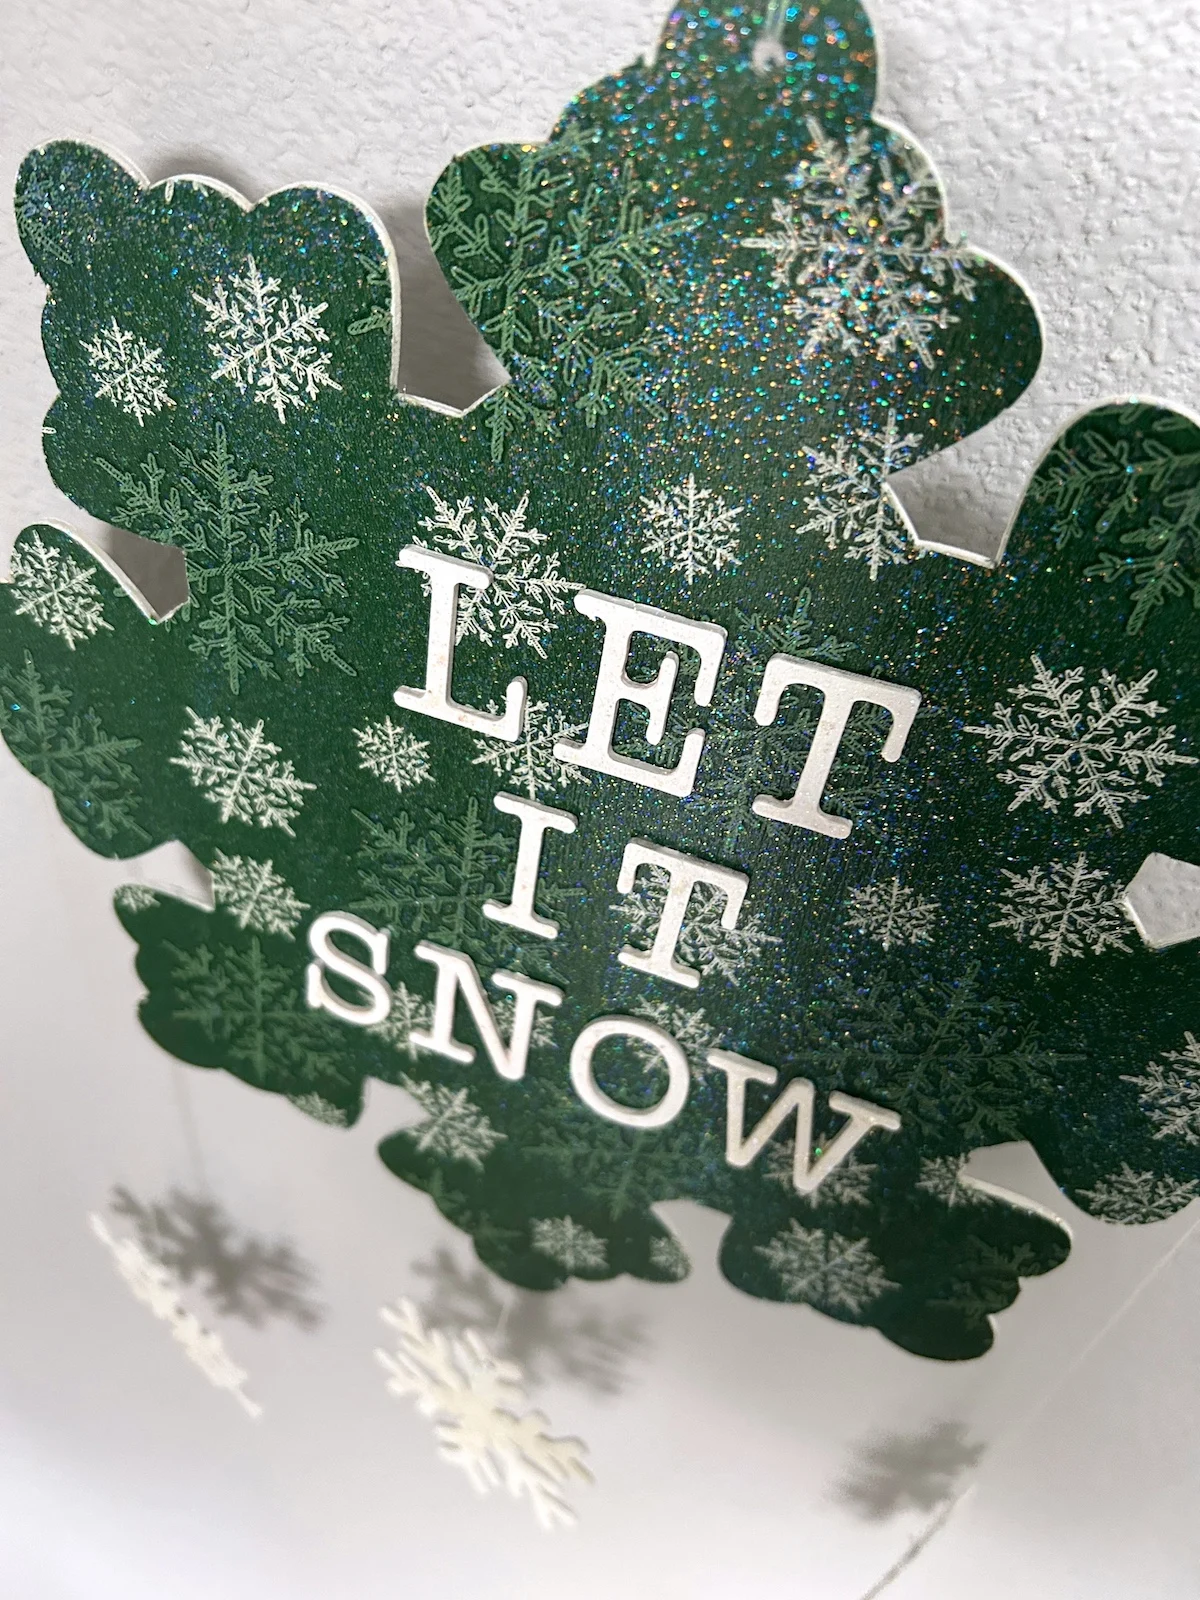 let it snow wood sign with dollar store supplies